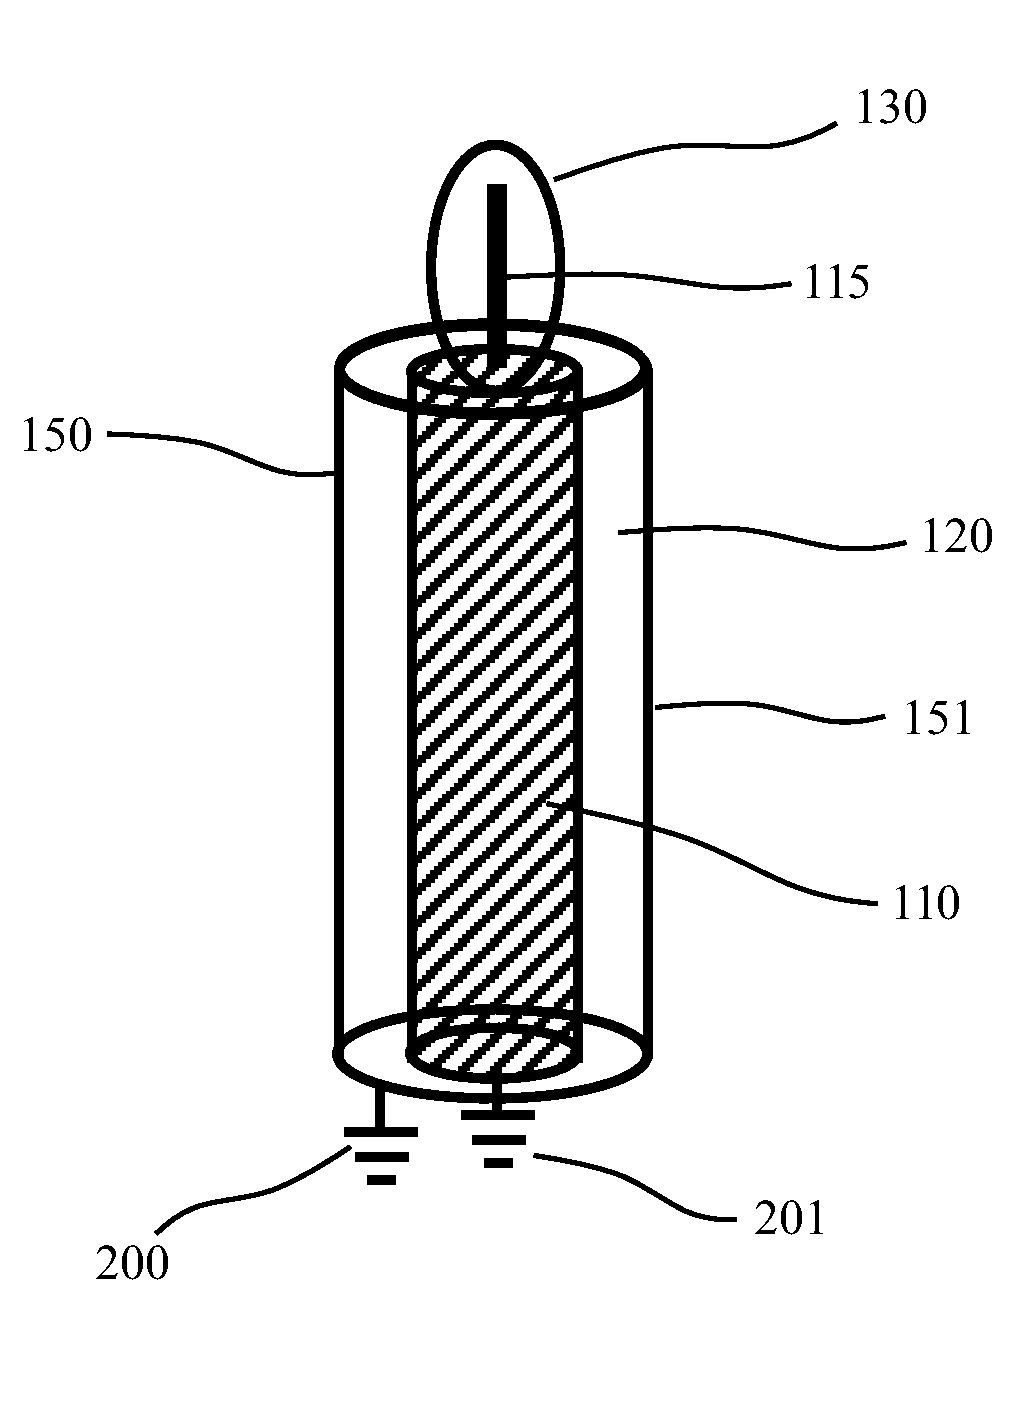 Electrodeless lamps with coaxial type resonators/waveguides and grounded coupling elements